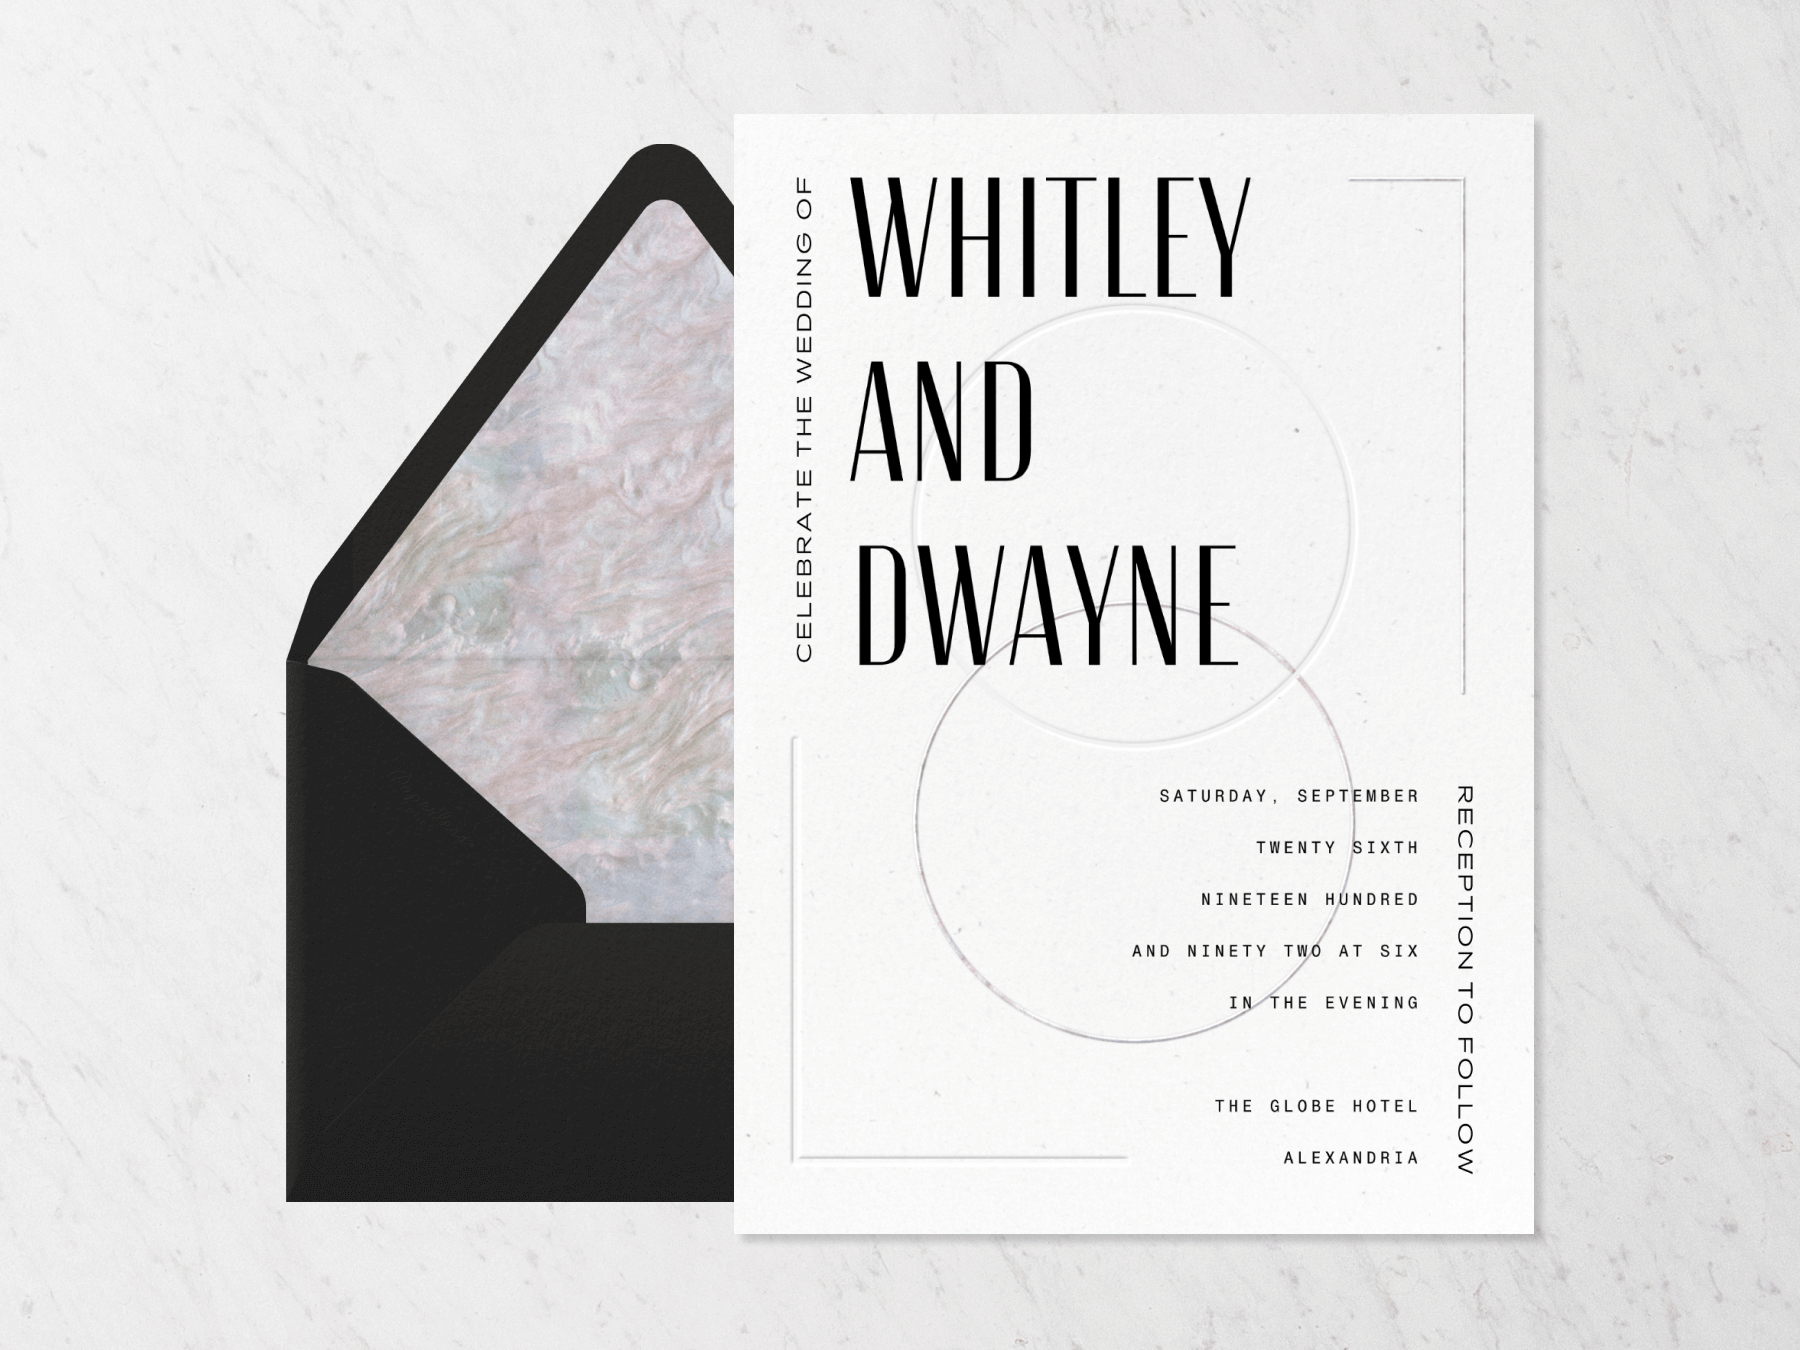 A white, minimalist wedding invitation with horizontally interlocking circles and the couple’s names written in large sans serif font beside a black envelope with marbled liner on a stone background.